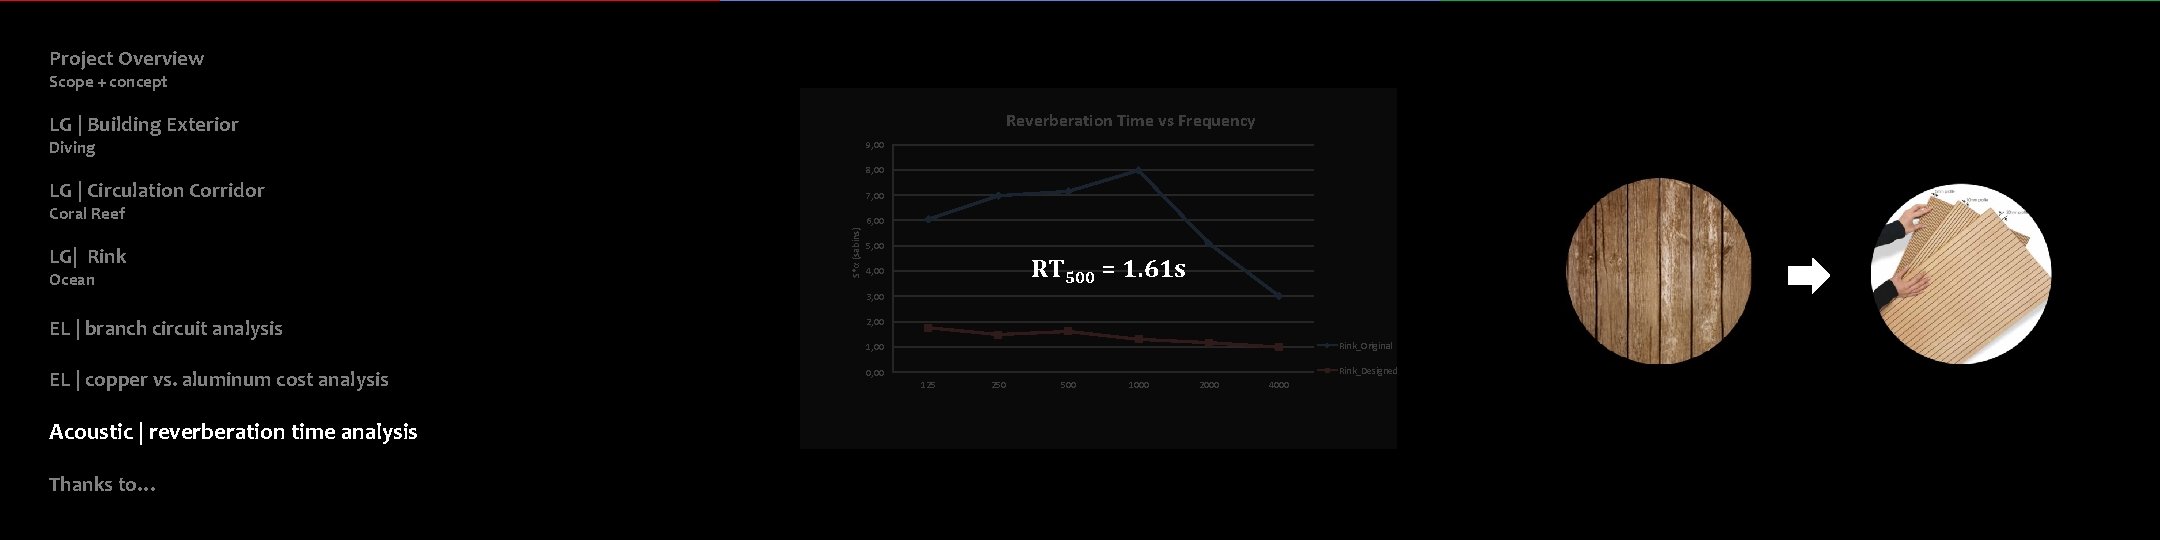 Project Overview Scope + concept Reverberation Time vs Frequency LG | Building Exterior Diving